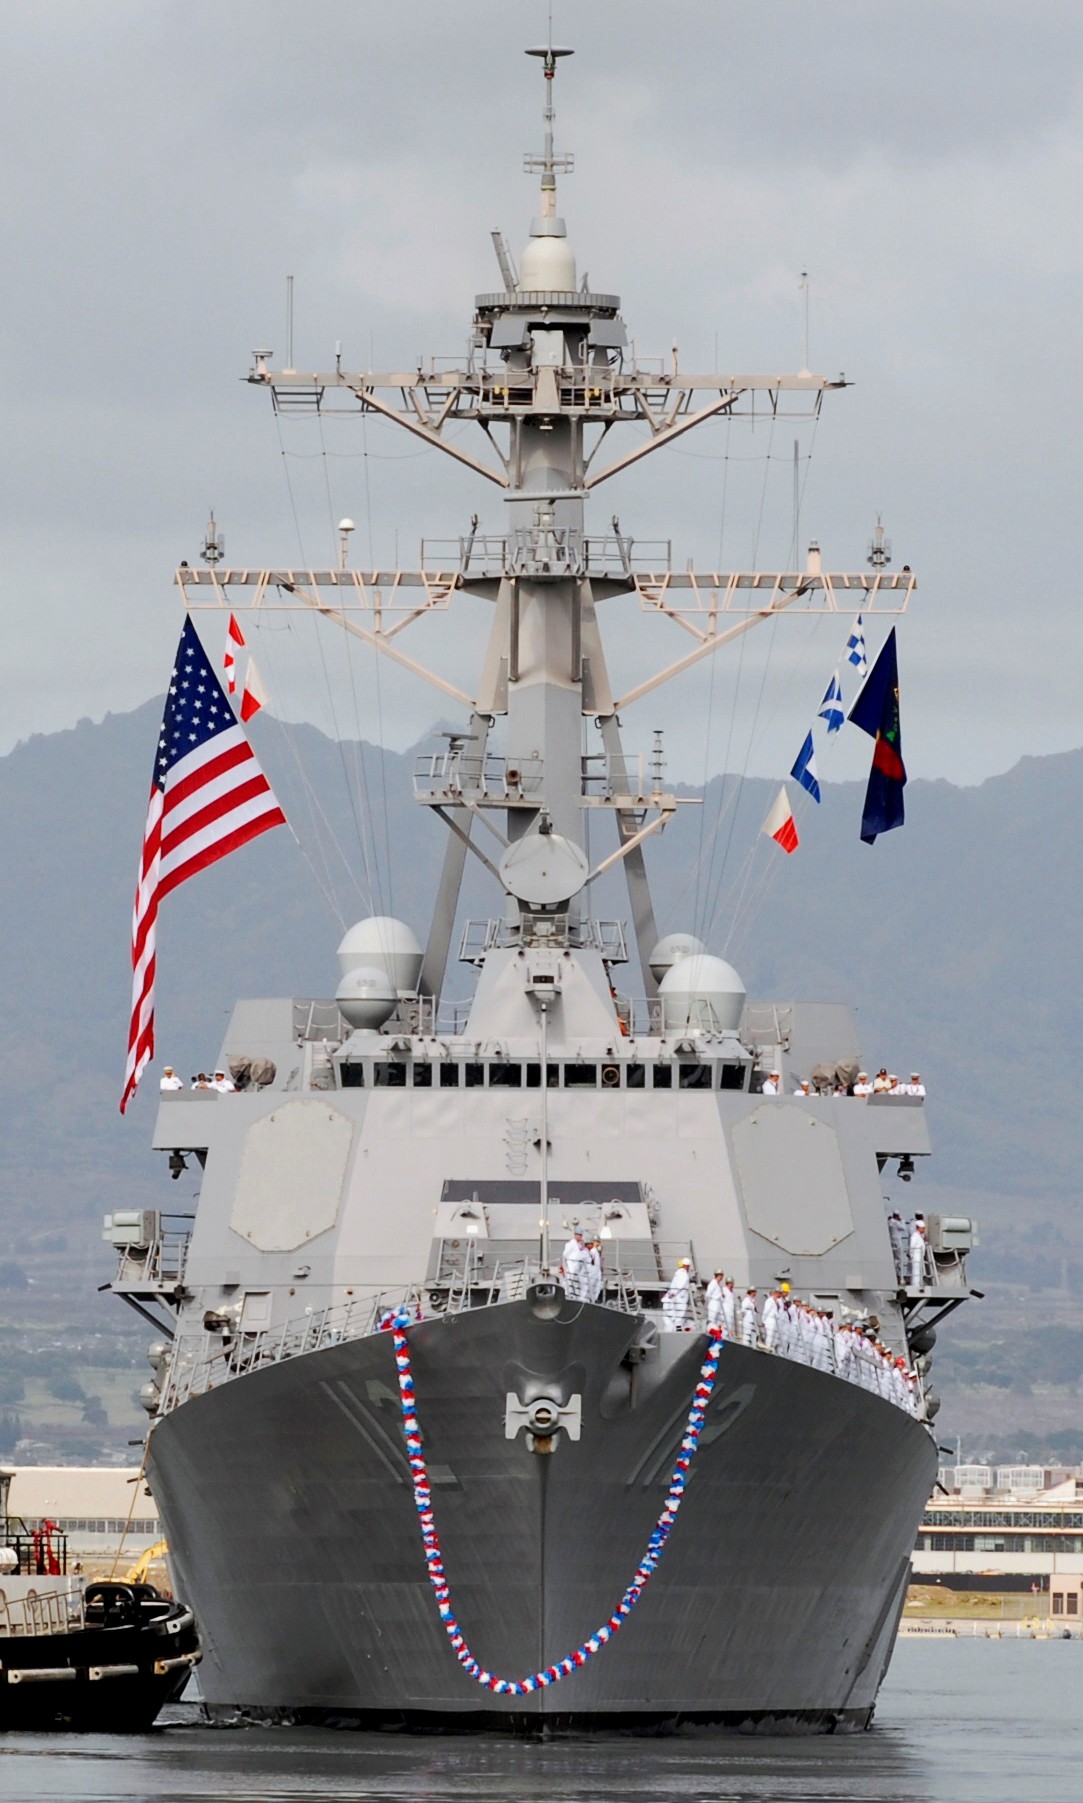 ddg-112 uss michael murphy arleigh burke class guided missile destroyer aegis us navy 71p